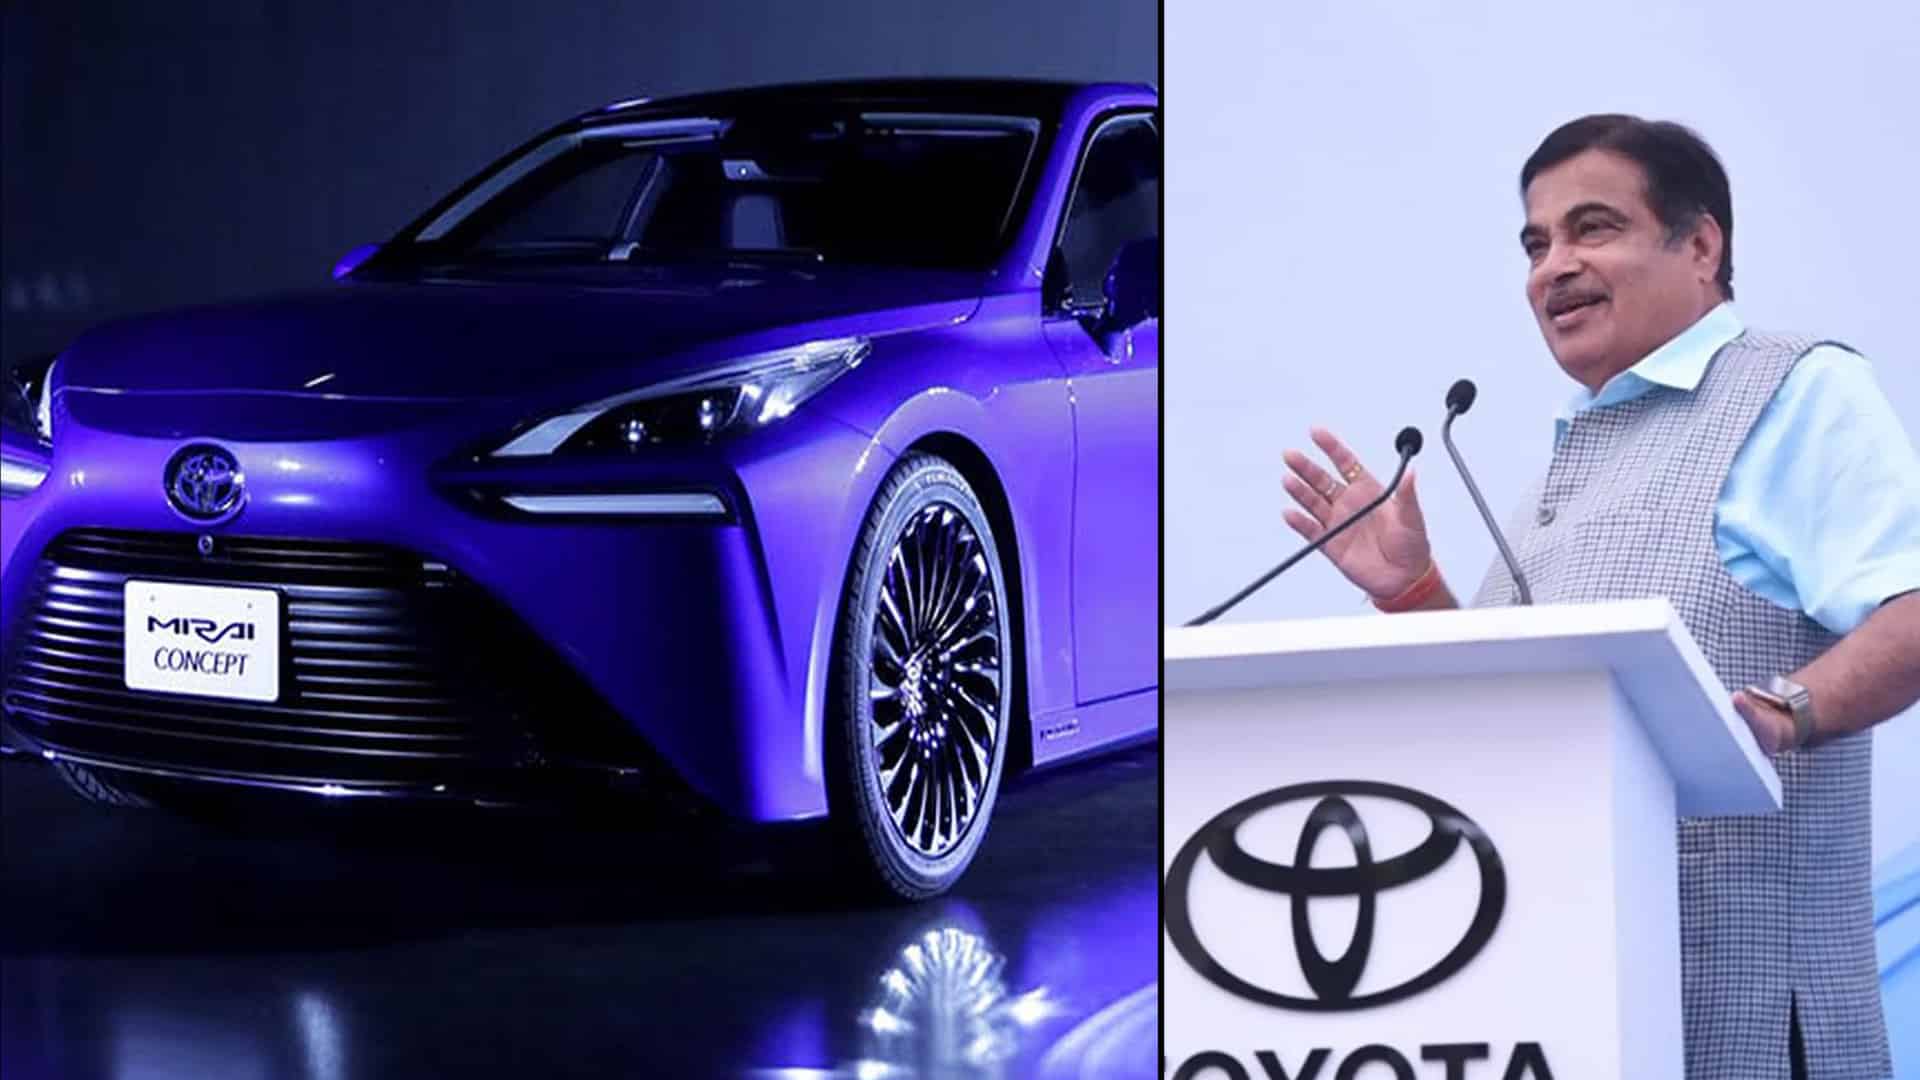 Gadkari launches green hydrogen-based fuel cell electric vehicle Toyota Mirai